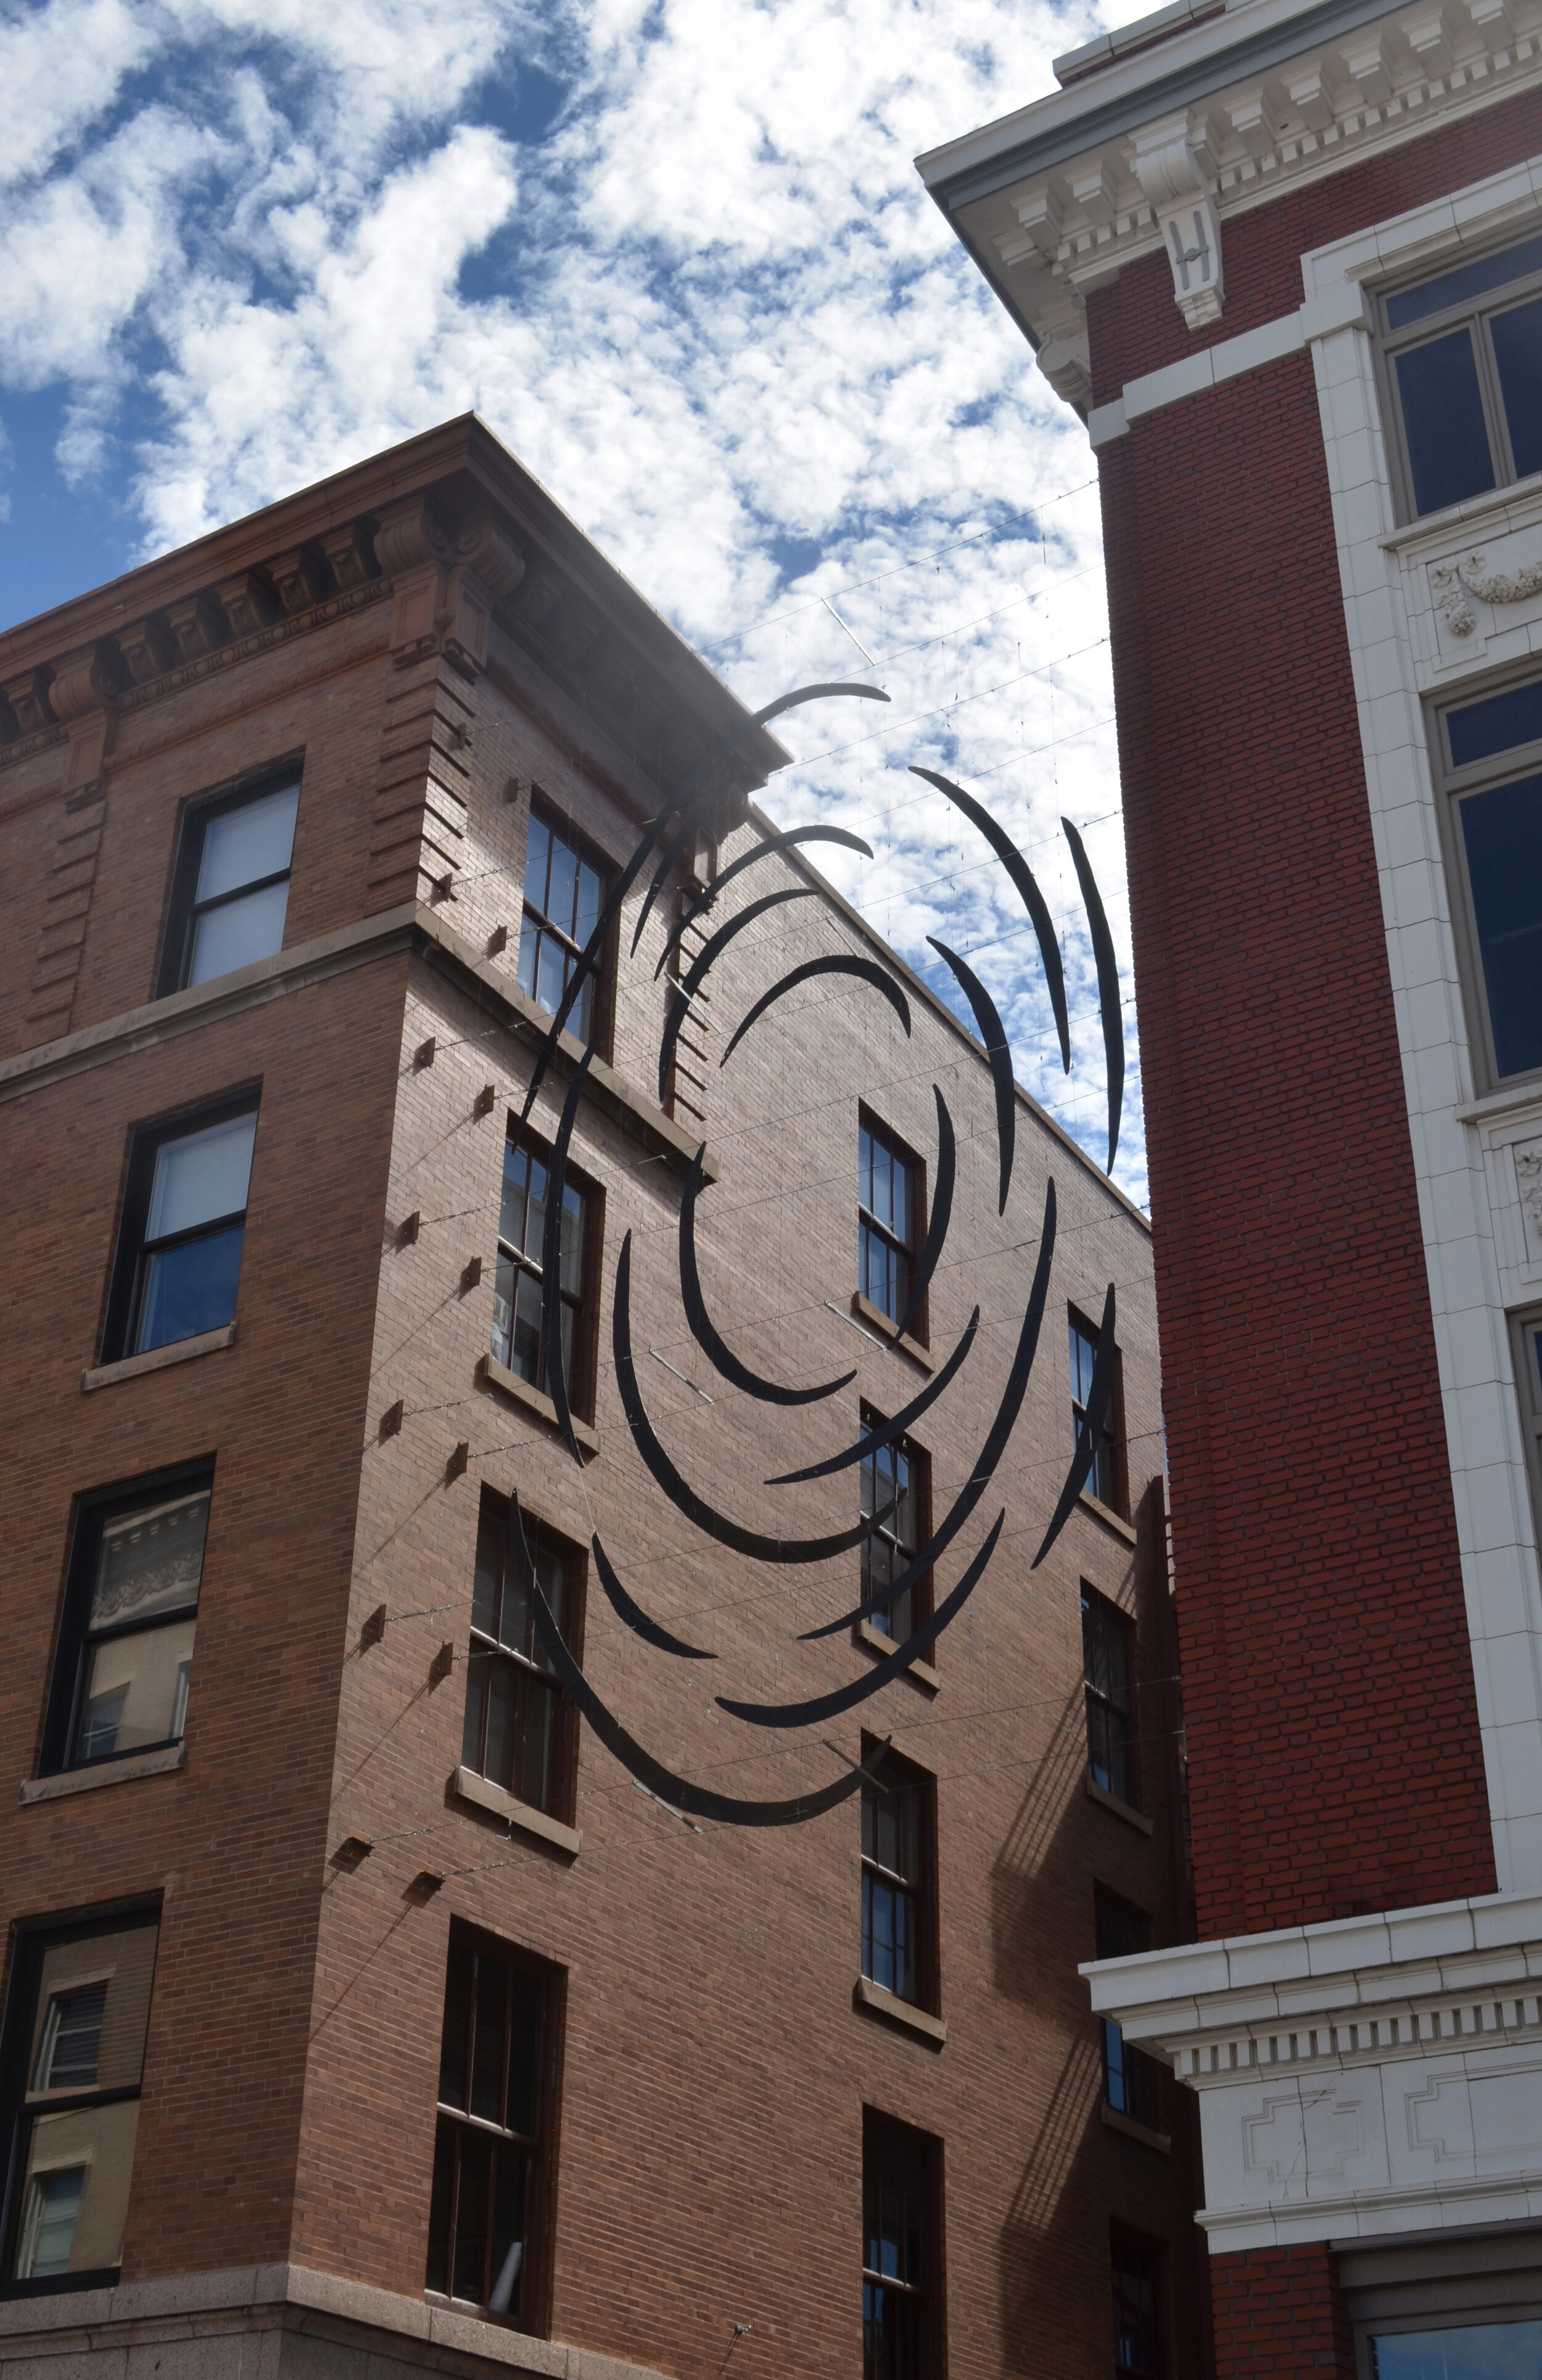  Vitrail  was commissioned for Art on the Streets, a year long series of installations in Downtown Colorado Springs. BJM collaborated on the fabrication with Mitch Berg at Fuego, in the South Valley of Albuquerque.   Cut sheet metal on cables. 2020 